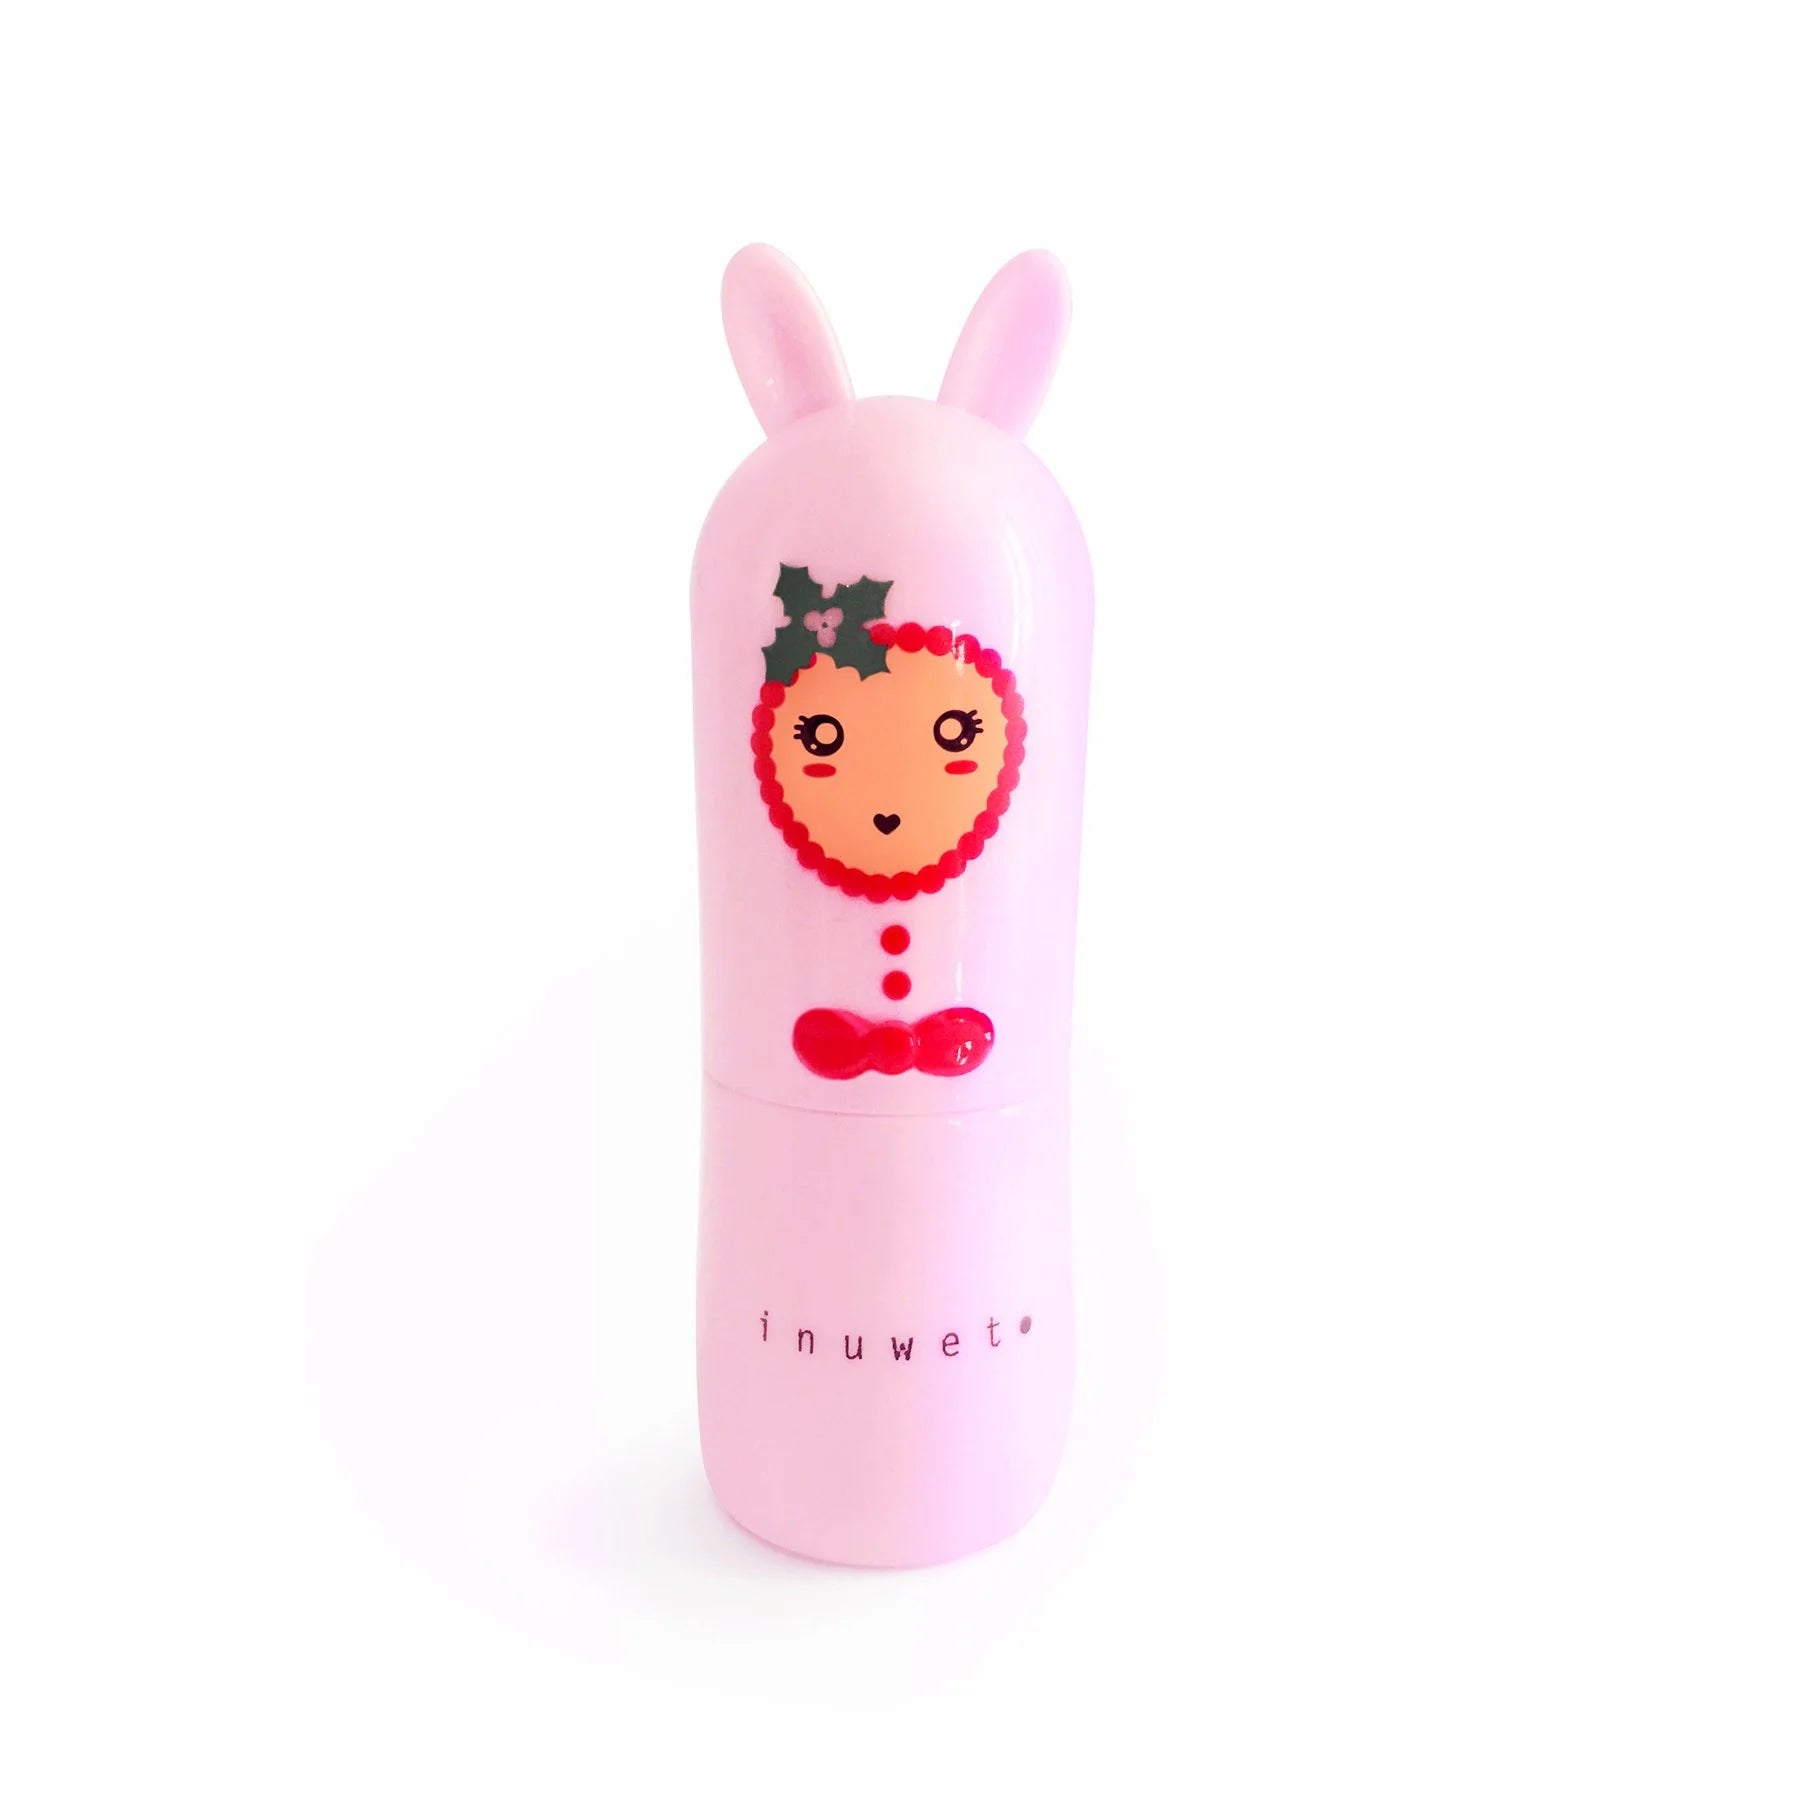 Inuwet - bunny lip balm - candy cane